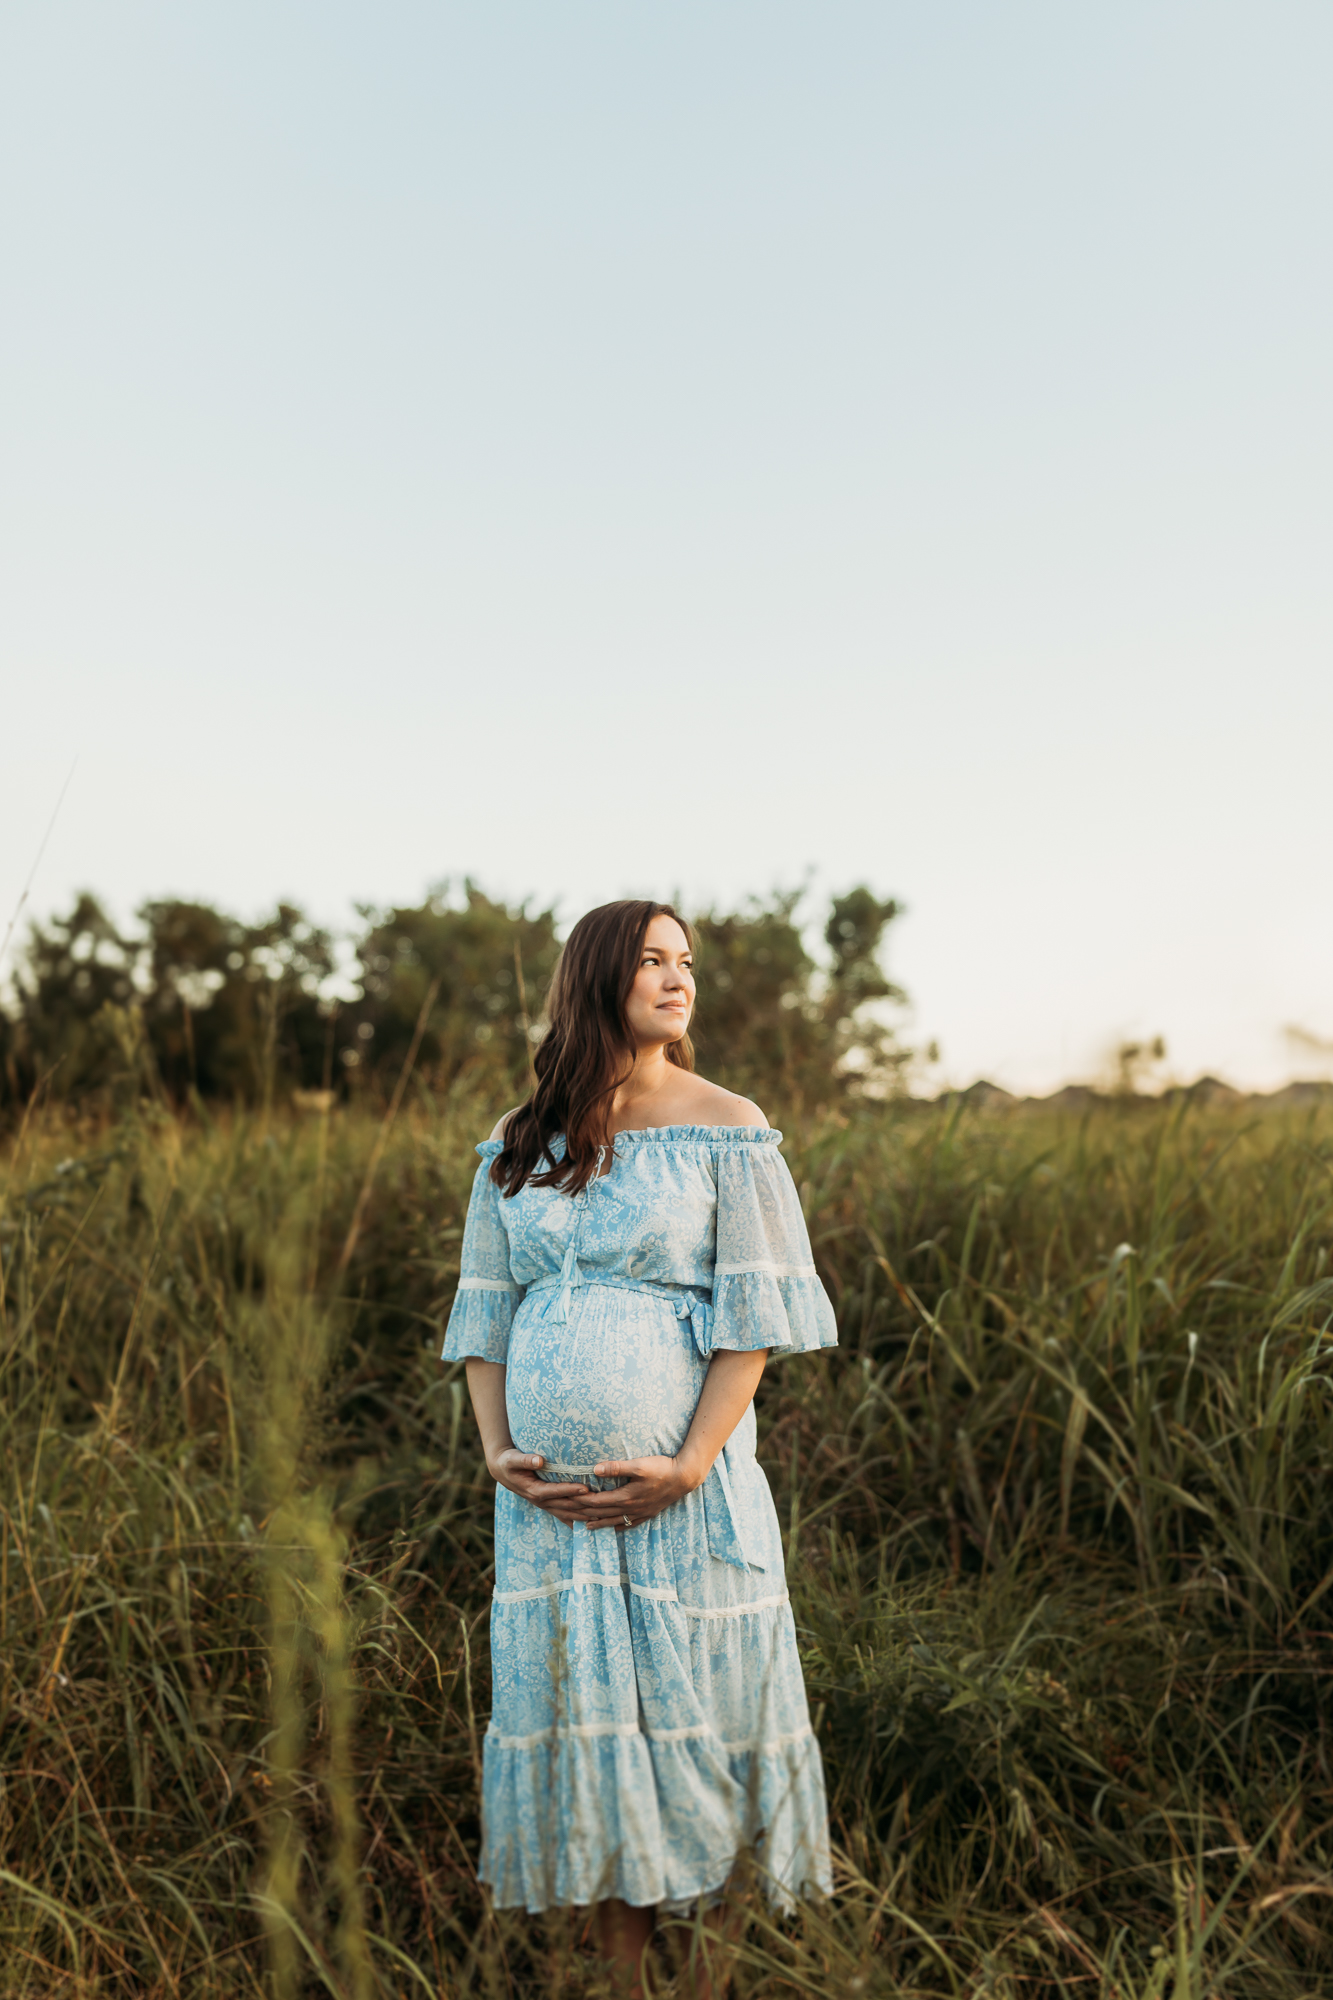 expectant mother in a field of grass wearing a blue dress as she stares off into the sky.